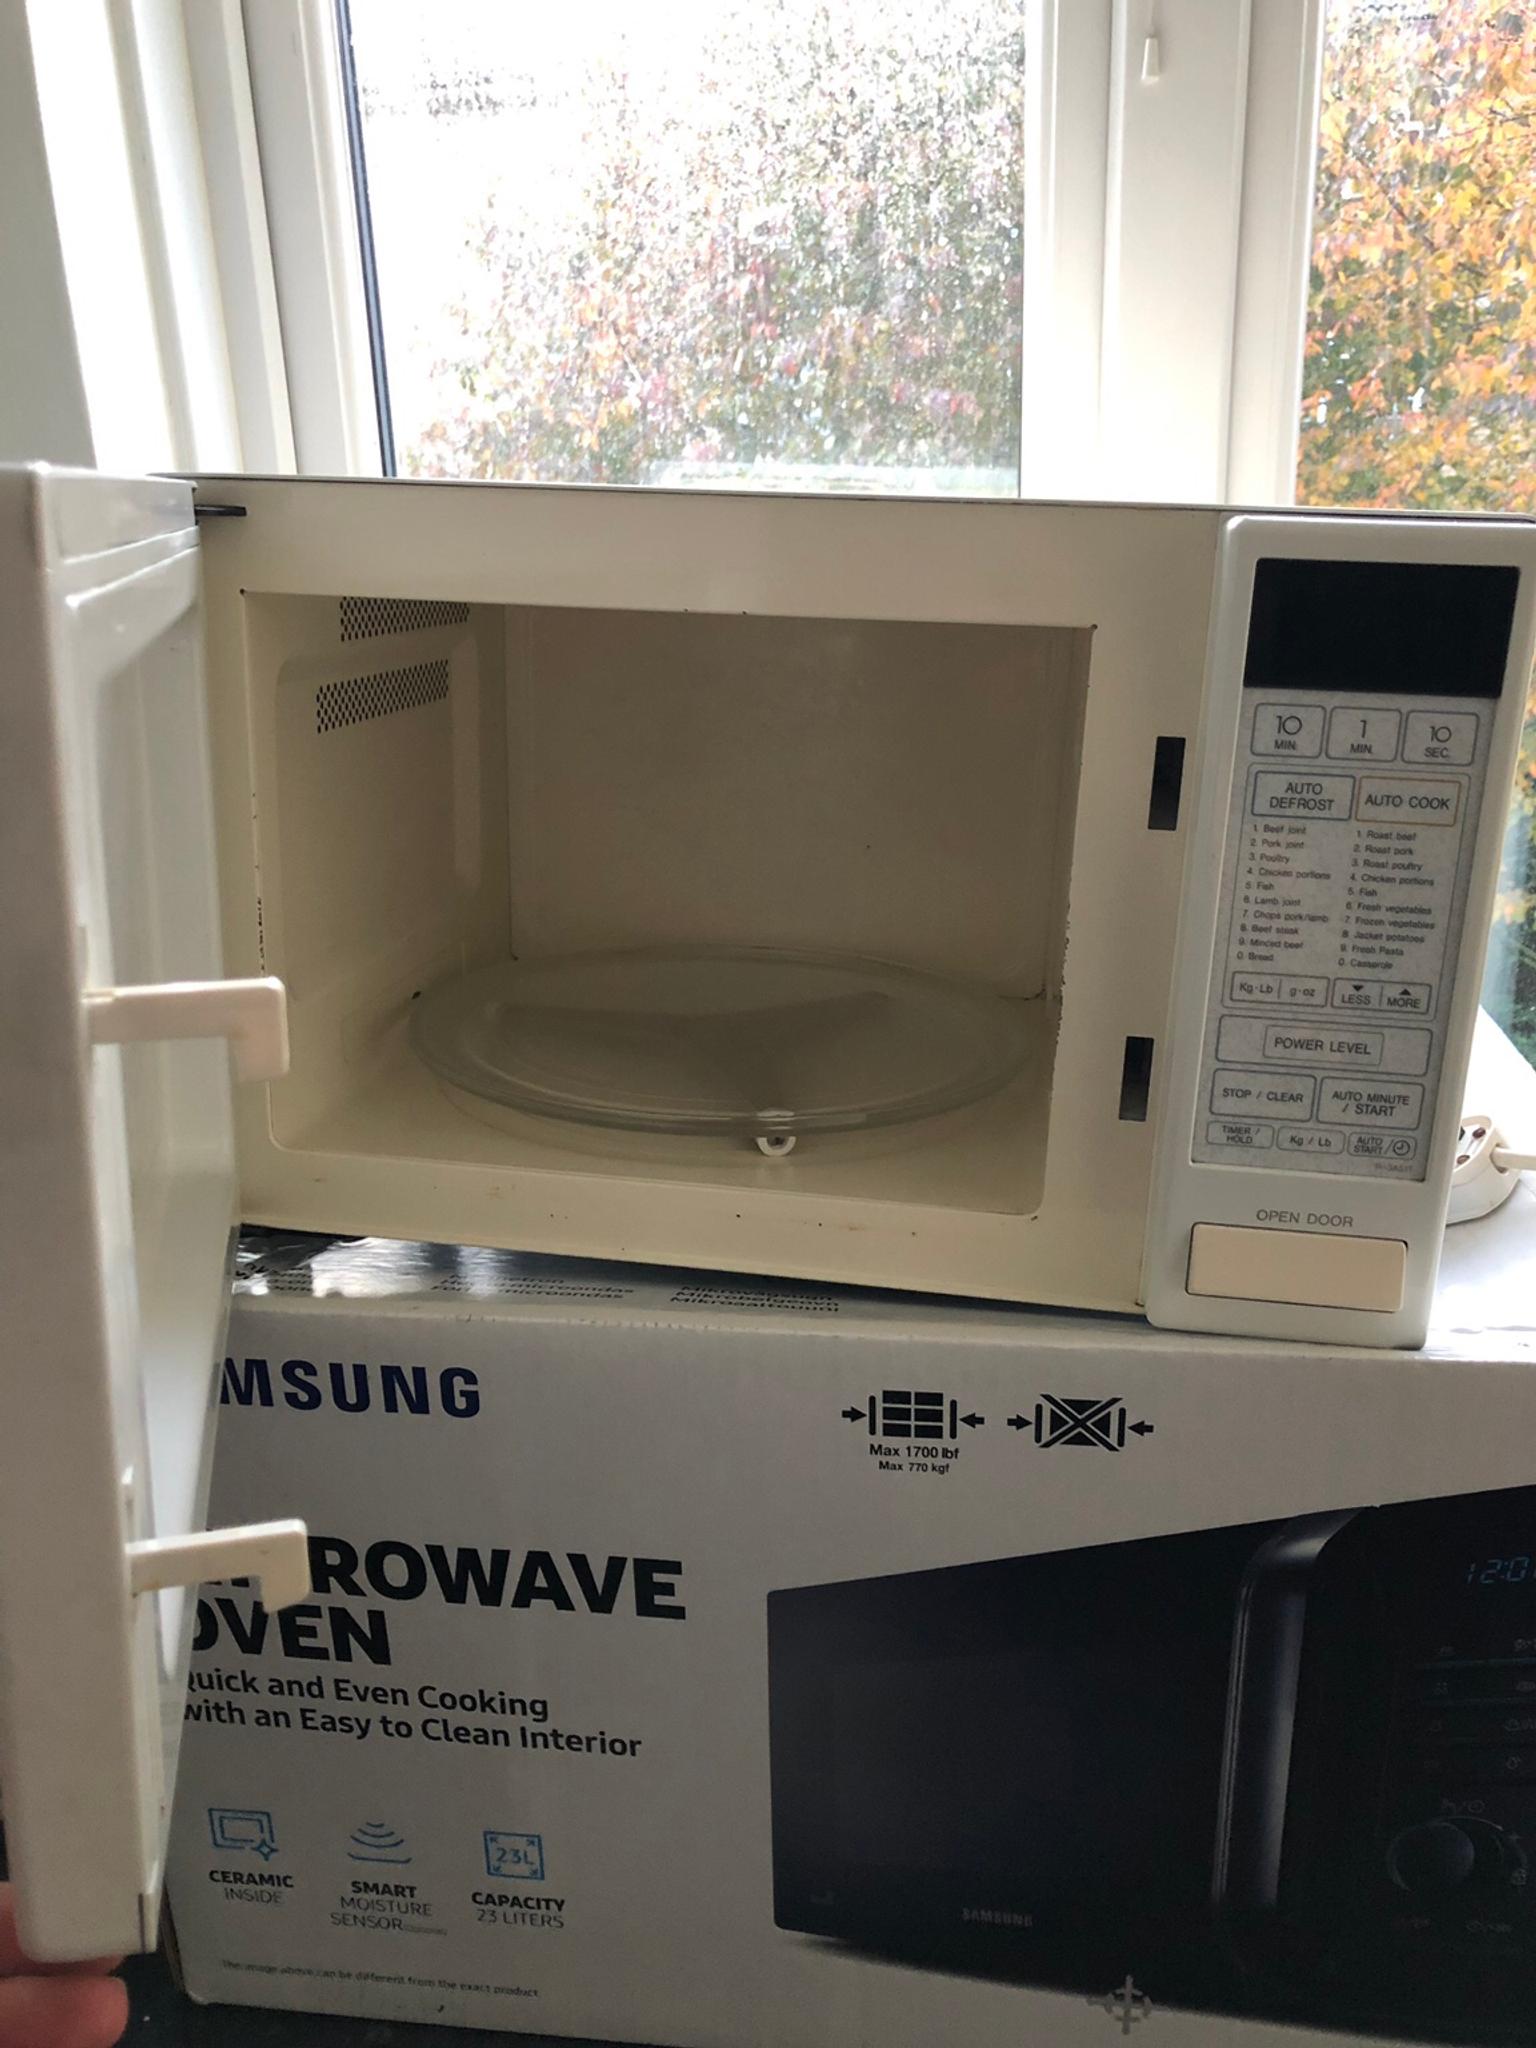 Sharp Compact Microwave Oven R-3A51(W)T in E2 London for £18.00 for